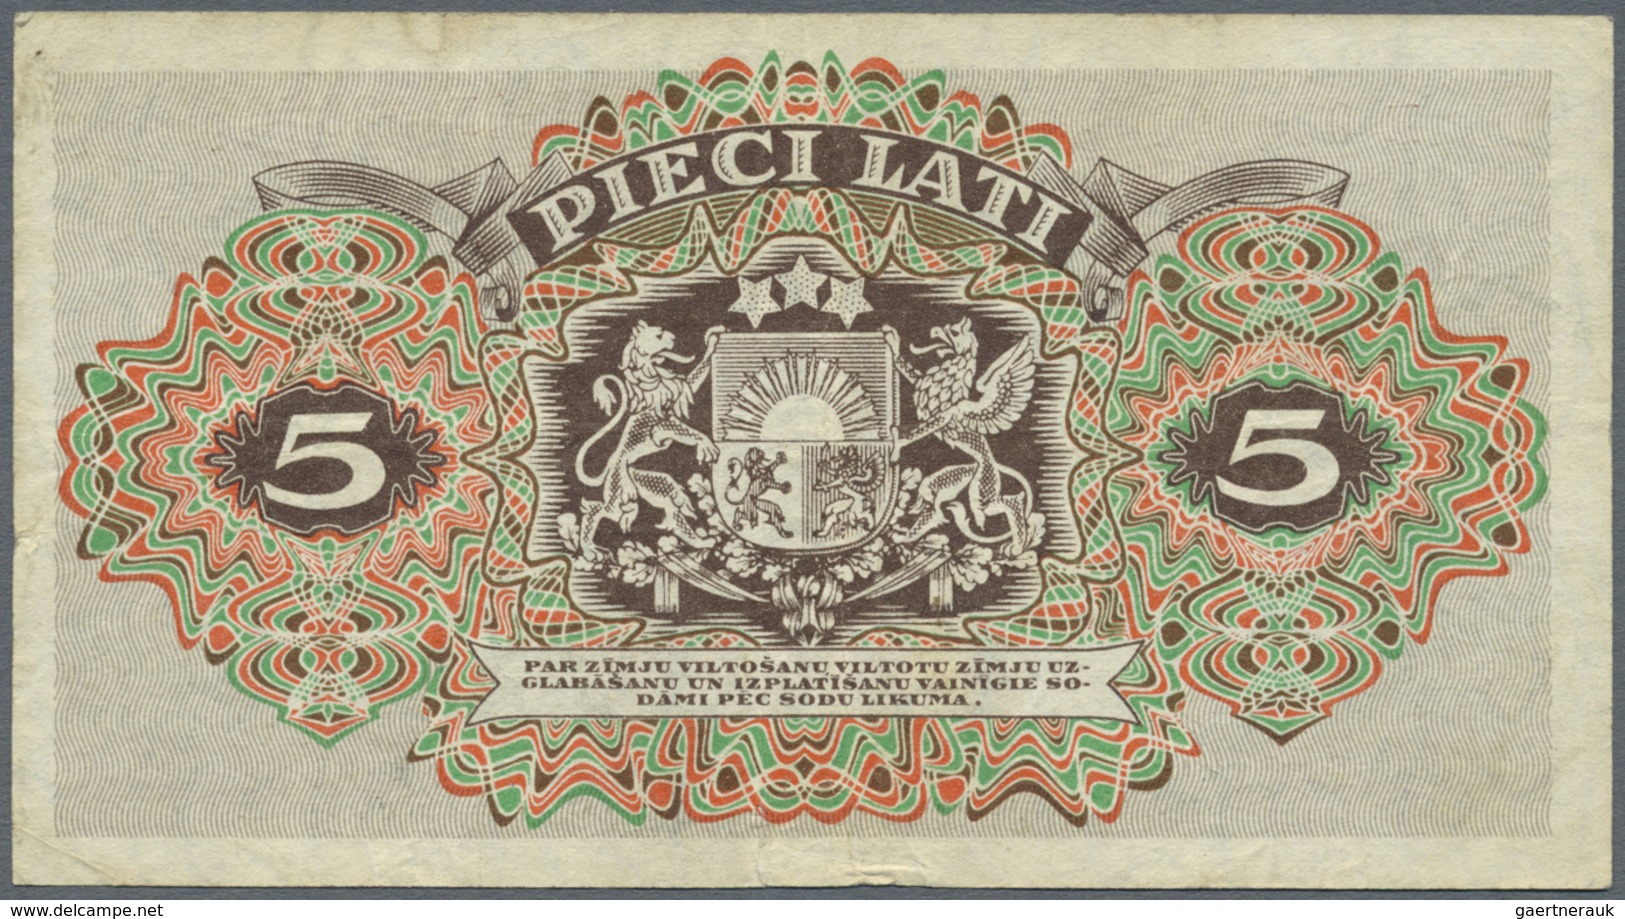 Latvia / Lettland: 5 Lati 1940 P. 34c, Used With Several Folds, A 4mm Tear At Lower Border, No Holes - Latvia